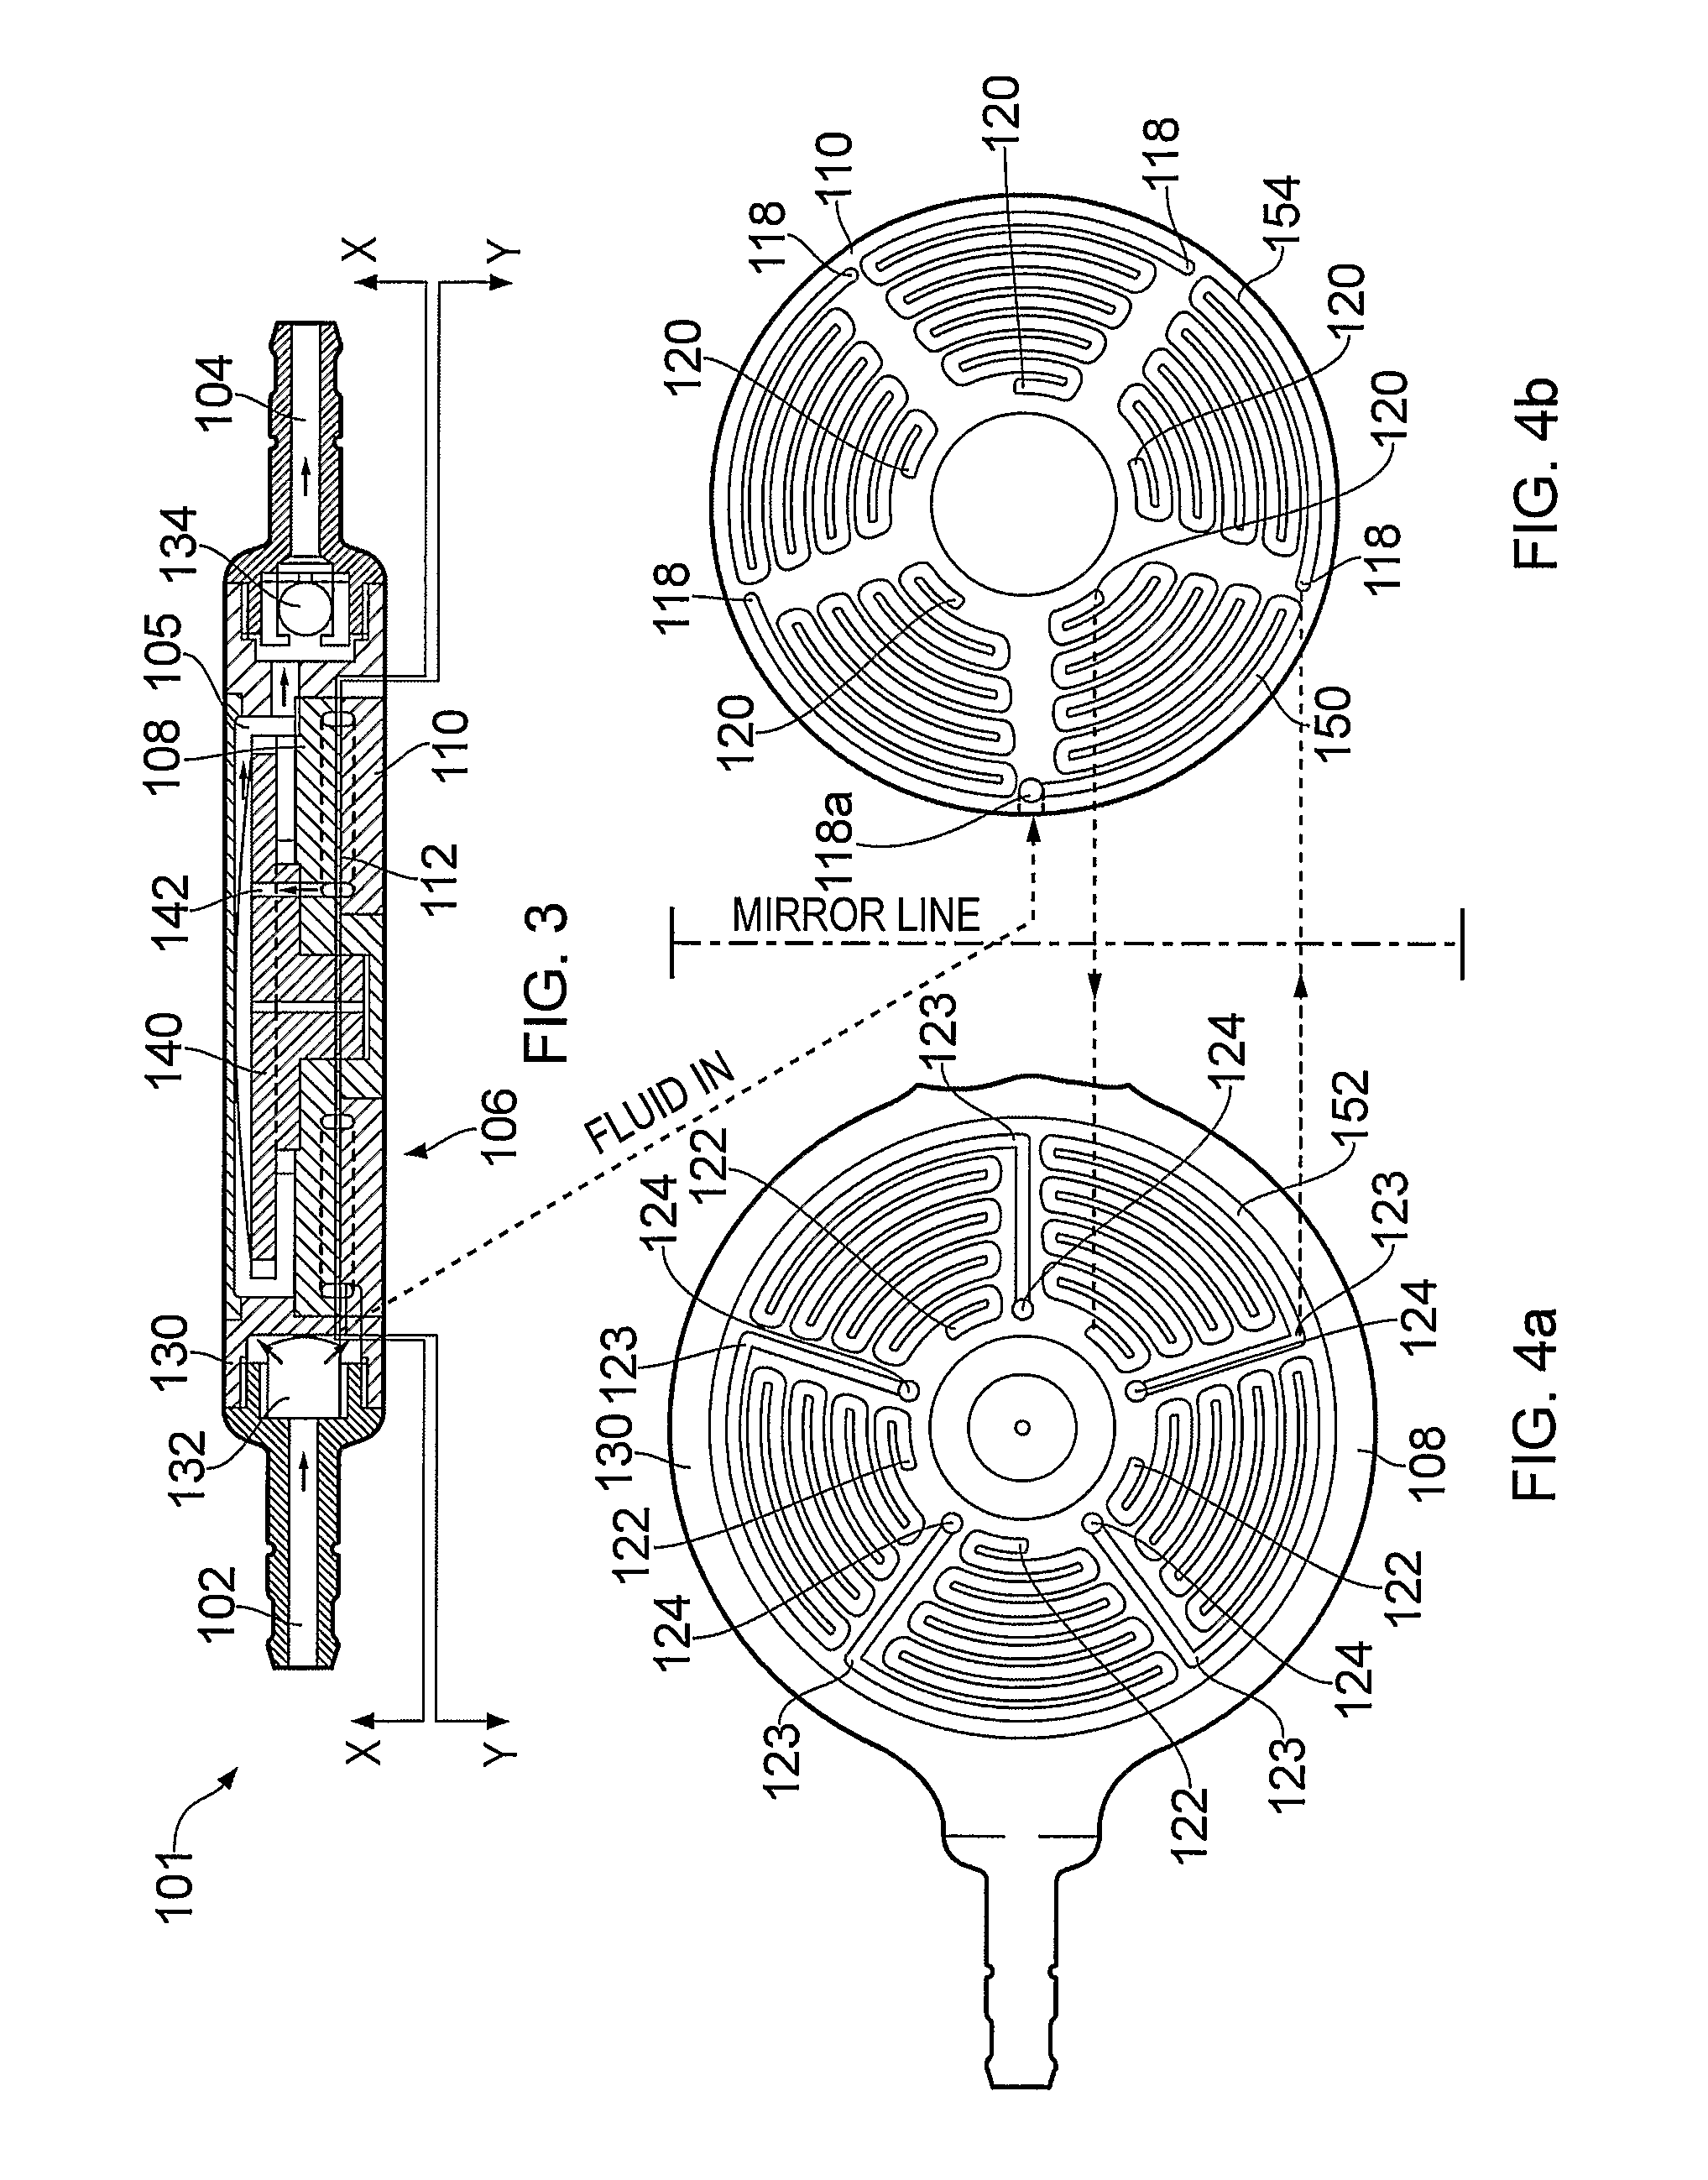 Device for controlling the rate of flow of a fluid